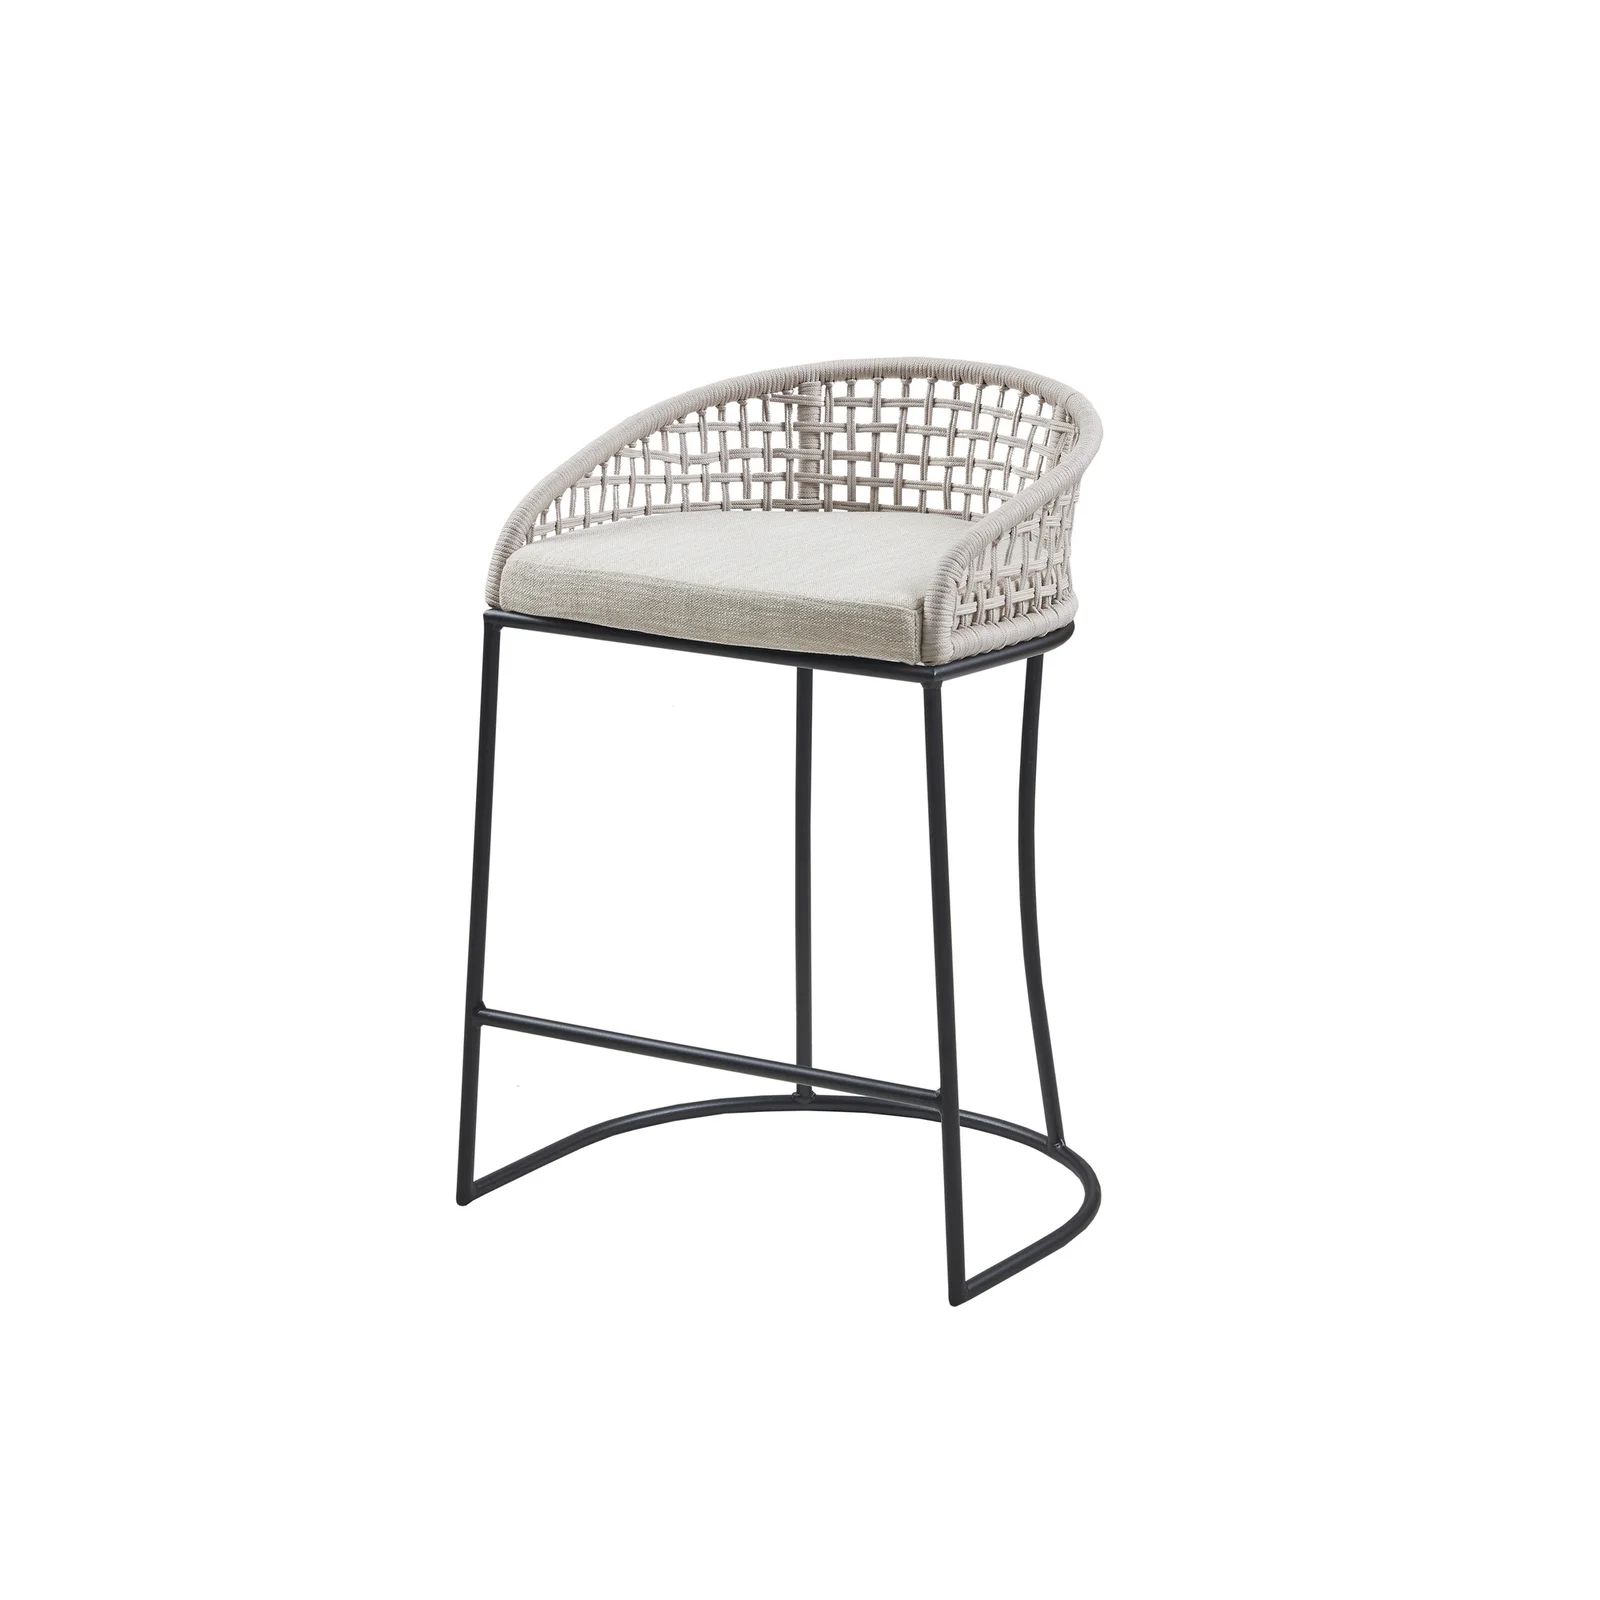 Woven Low Back Counter Stool | Wayfair Professional